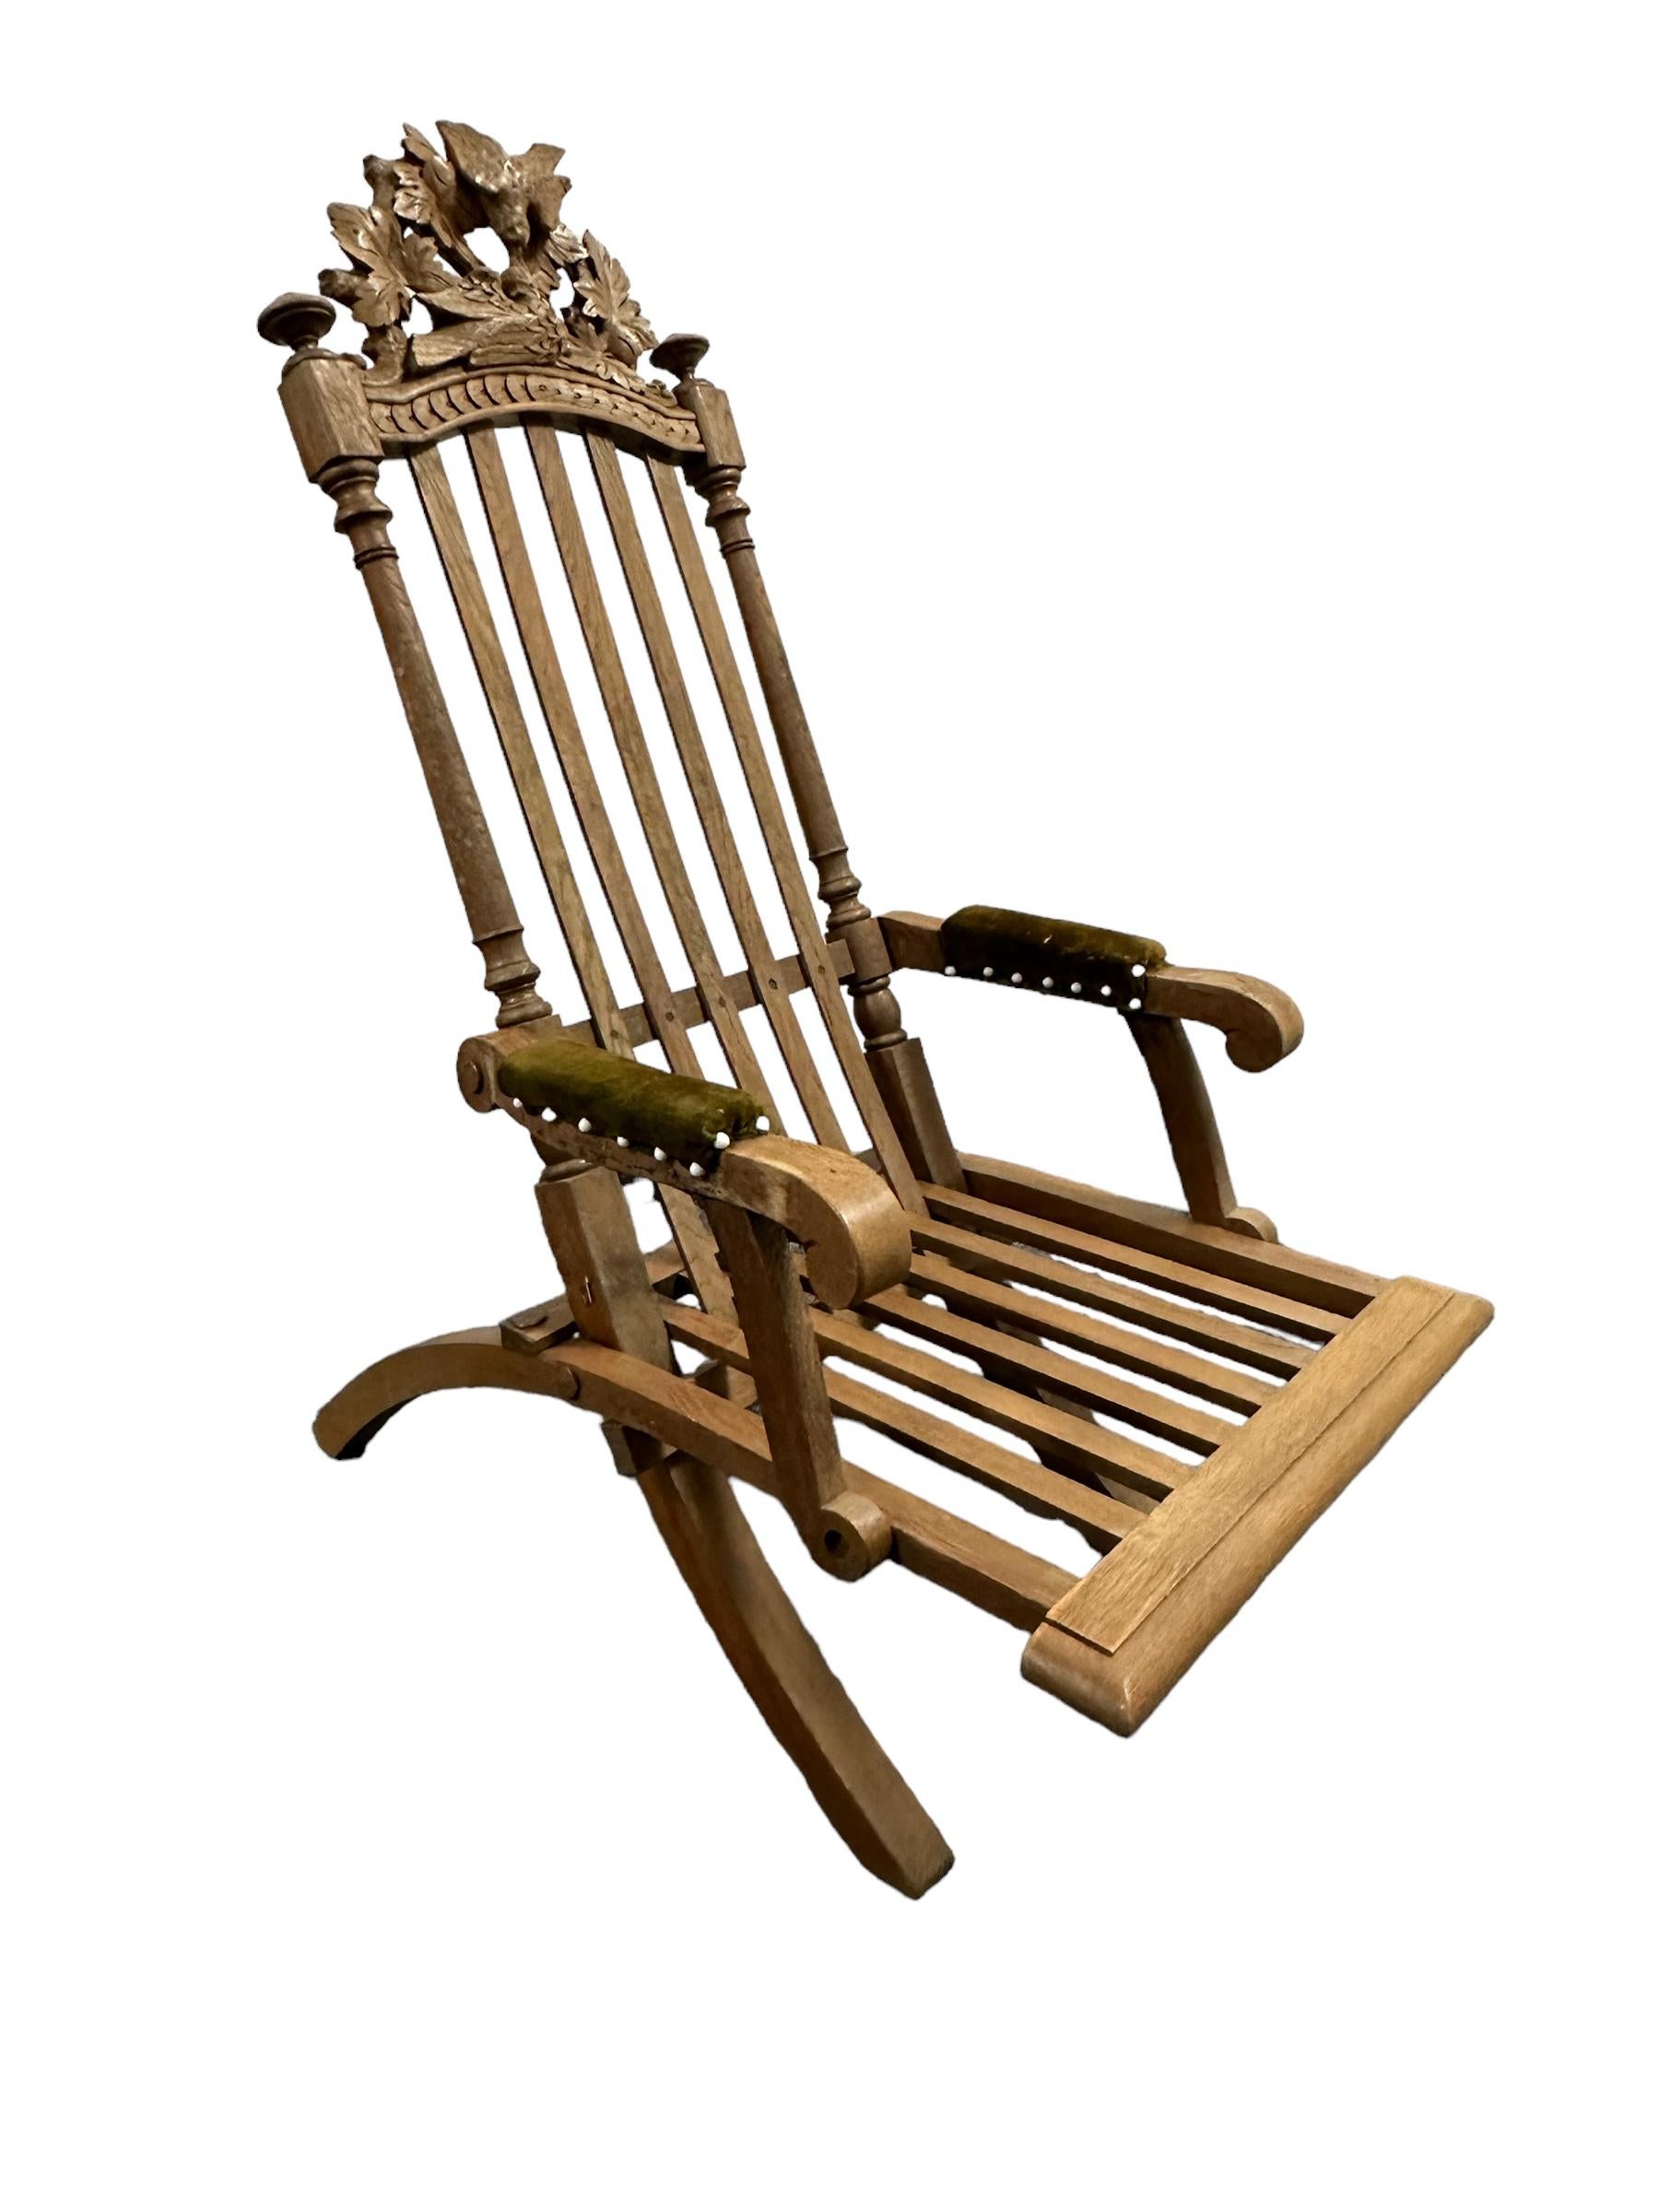 Hand-Crafted Antique Wooden Folding Chair, Black Forest Style carved Wood, 1910s For Sale